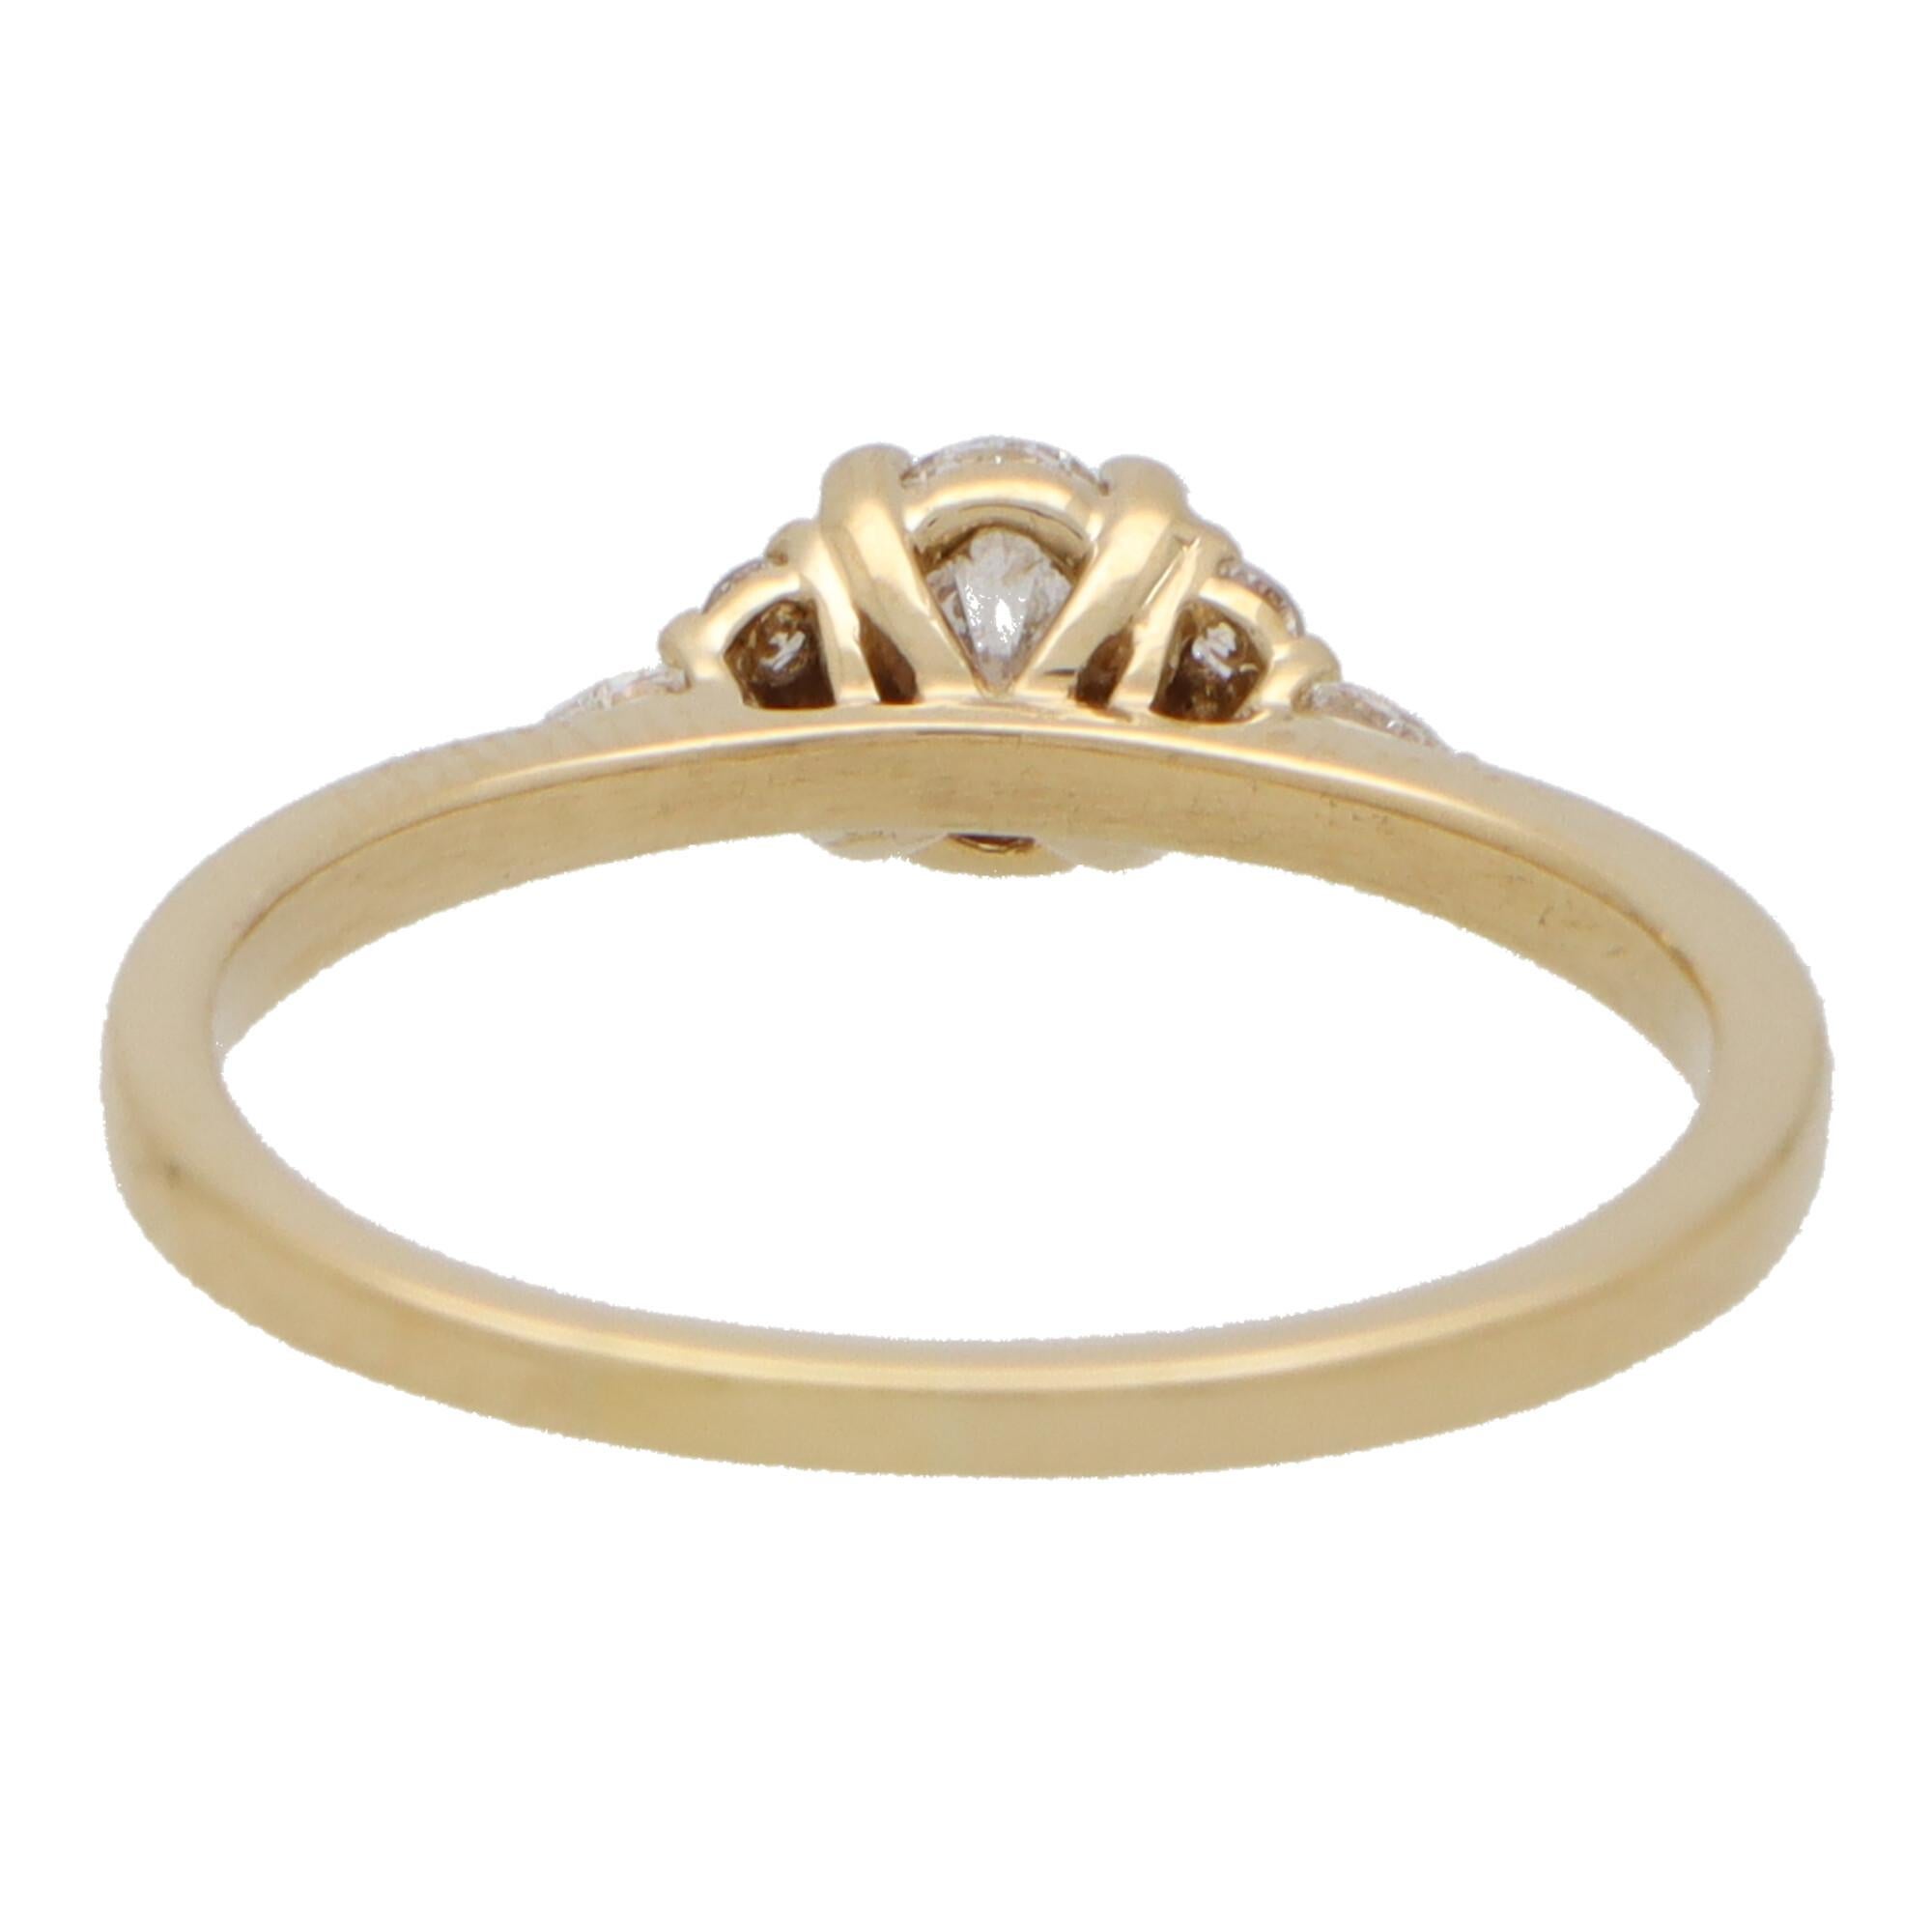 Vintage GIA Certified Oval Cut Diamond Ring Set in 18k Yellow Gold 1